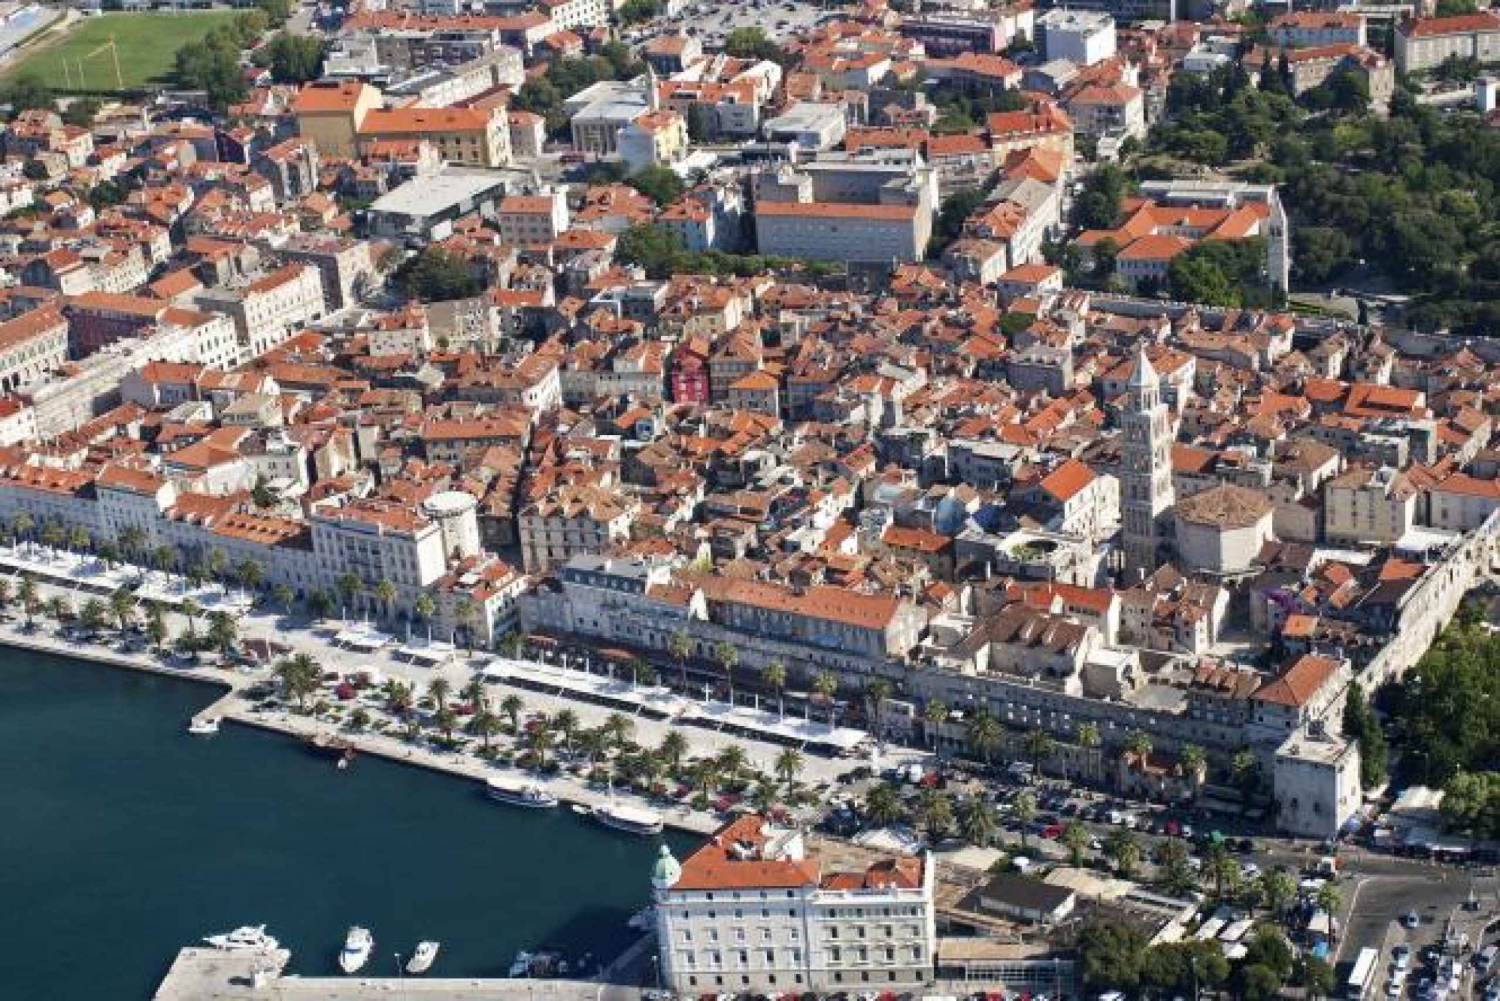 Visit-the-Diocletians-Palace-in-Split